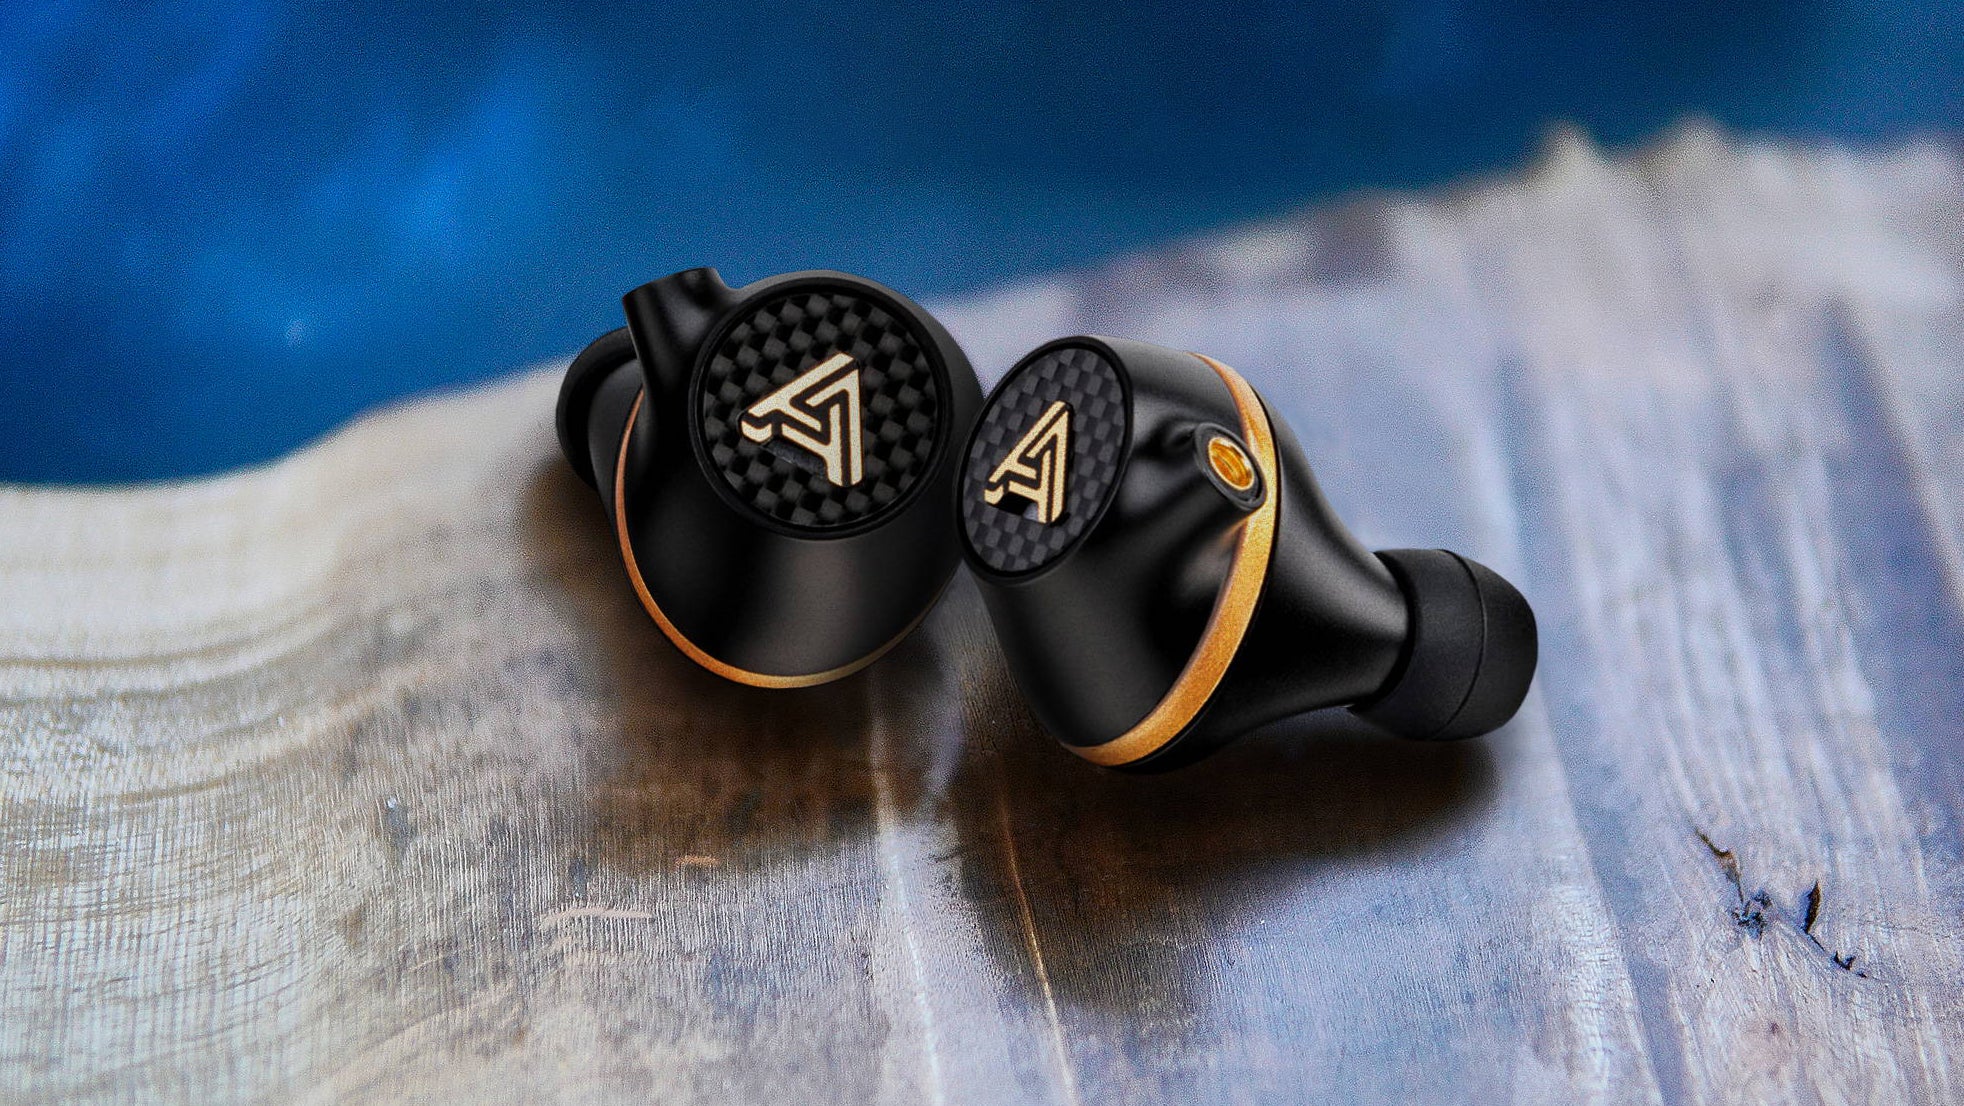 Audeze Euclid review: planar magnetic in-ears tested for gaming and more